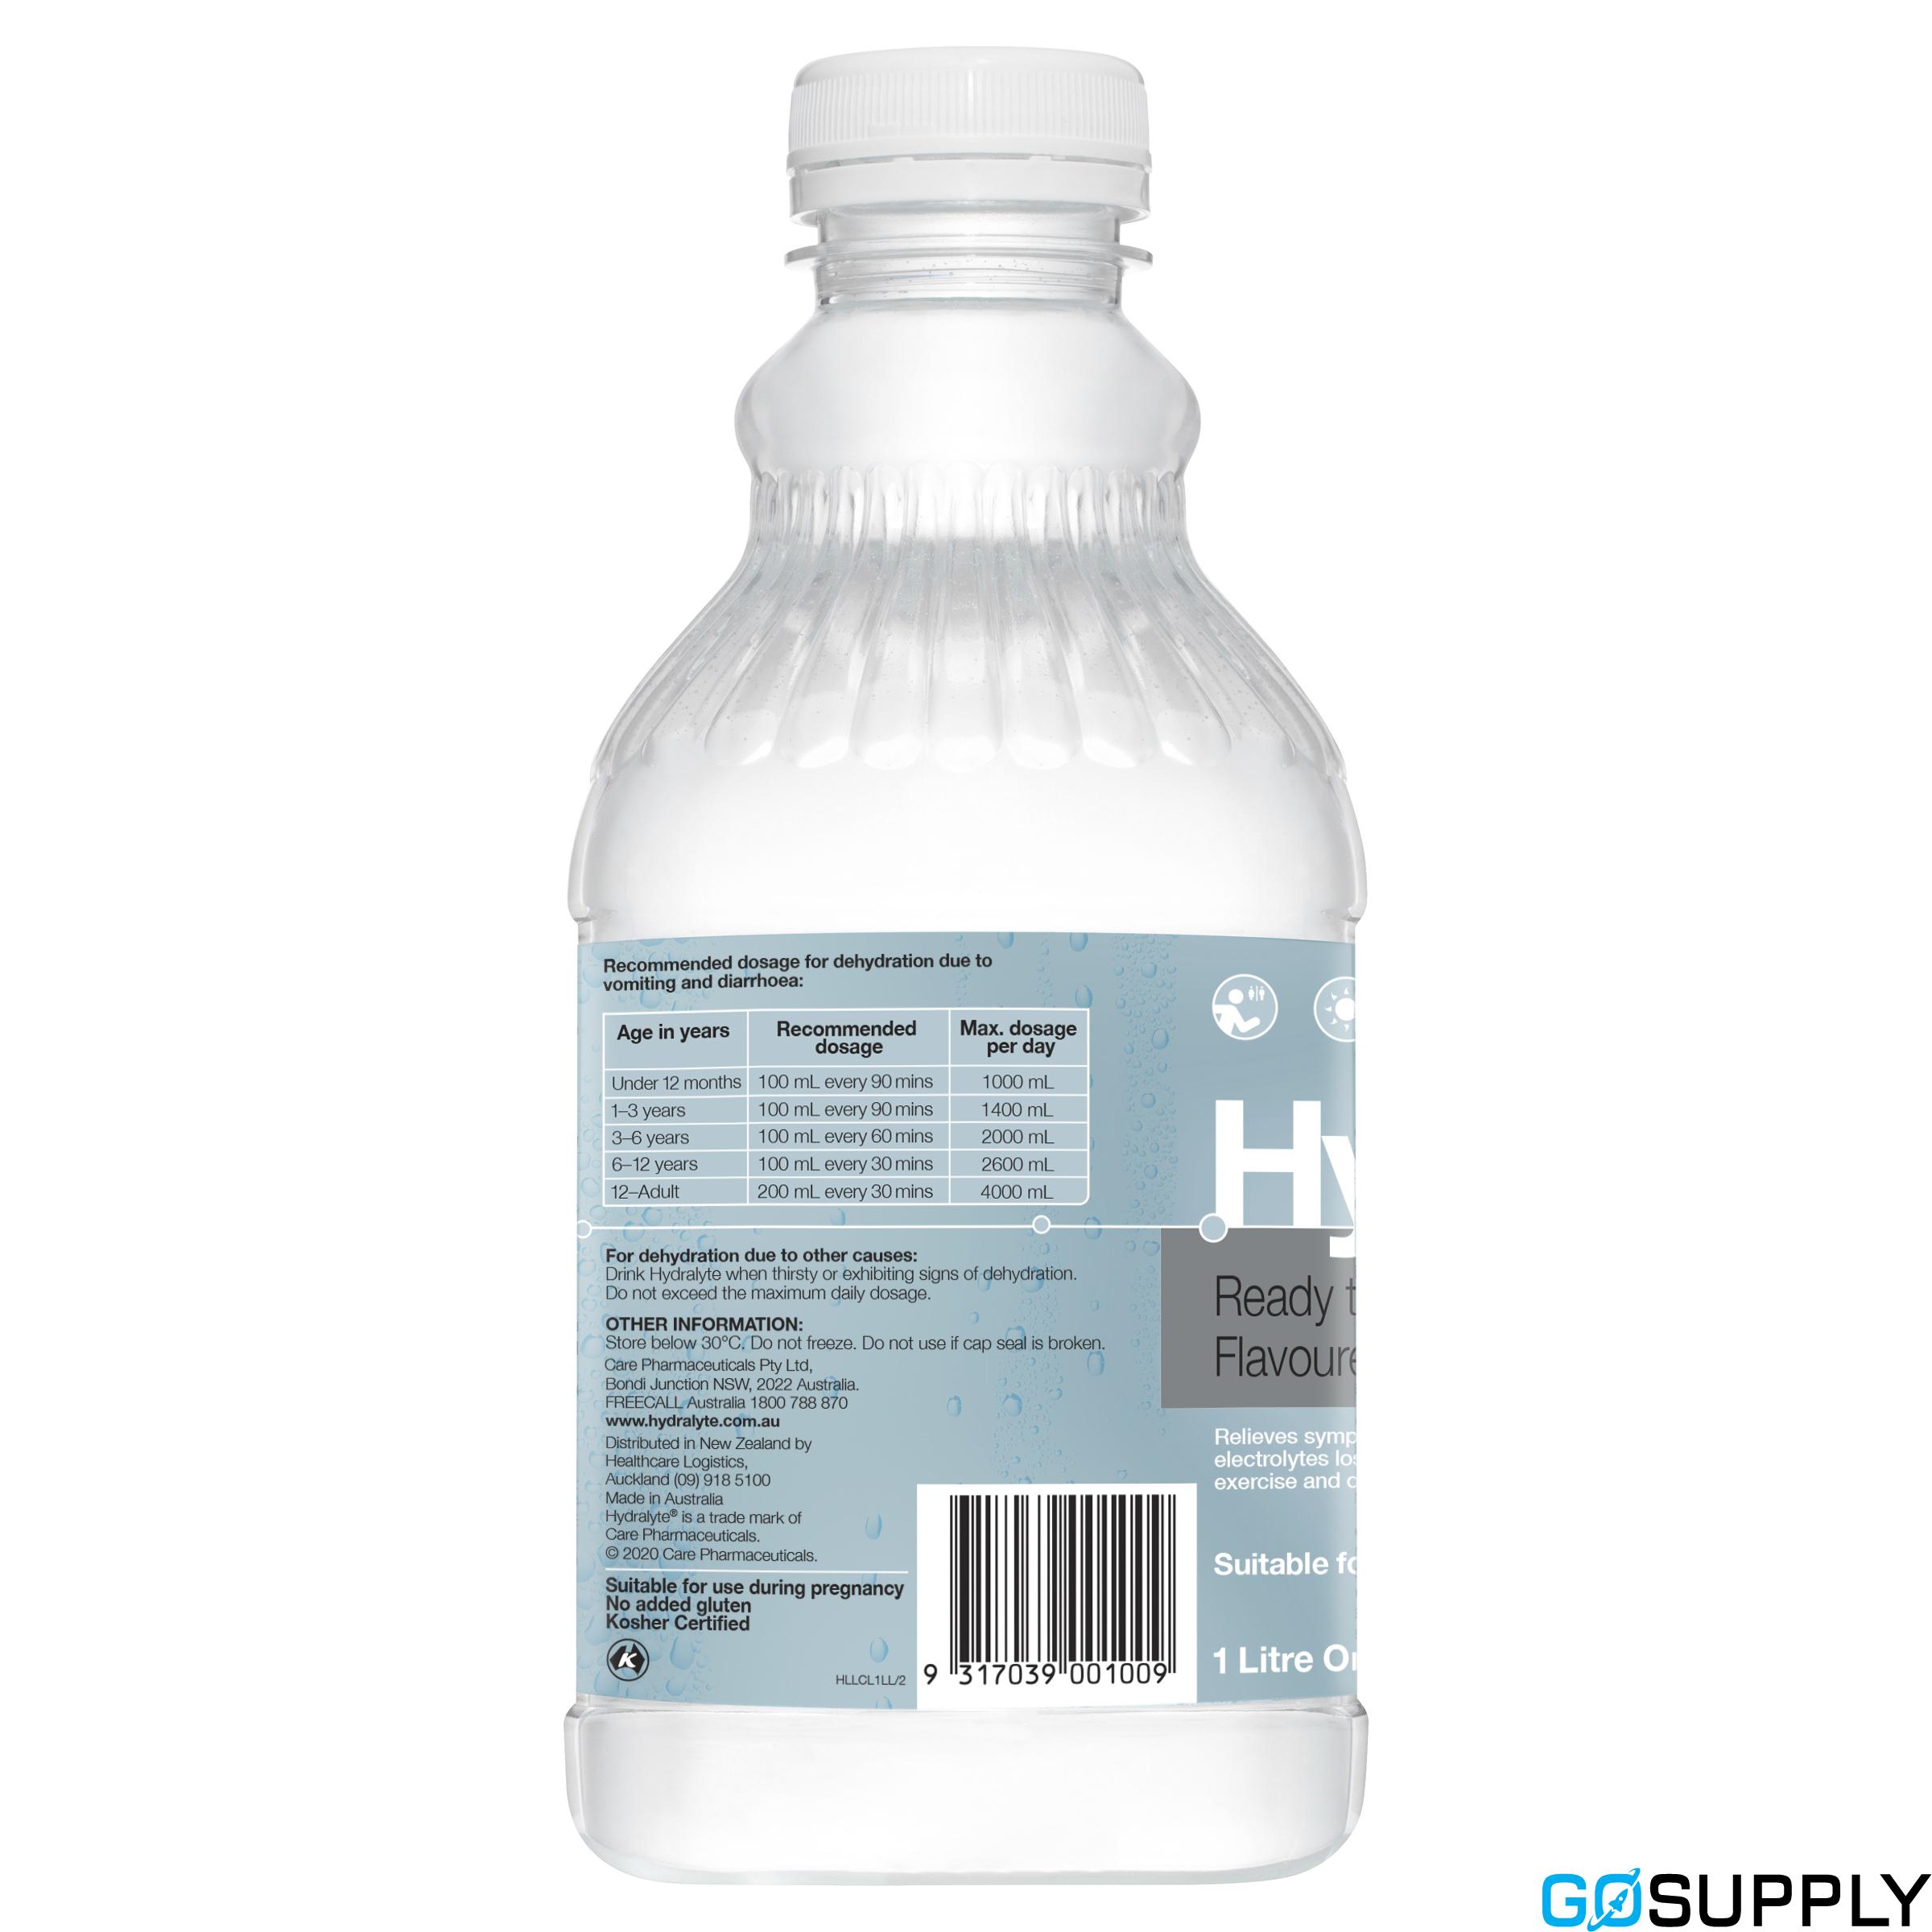 Hydralyte Ready to use Electrolyte Solution Colour Free Lemonade 1L